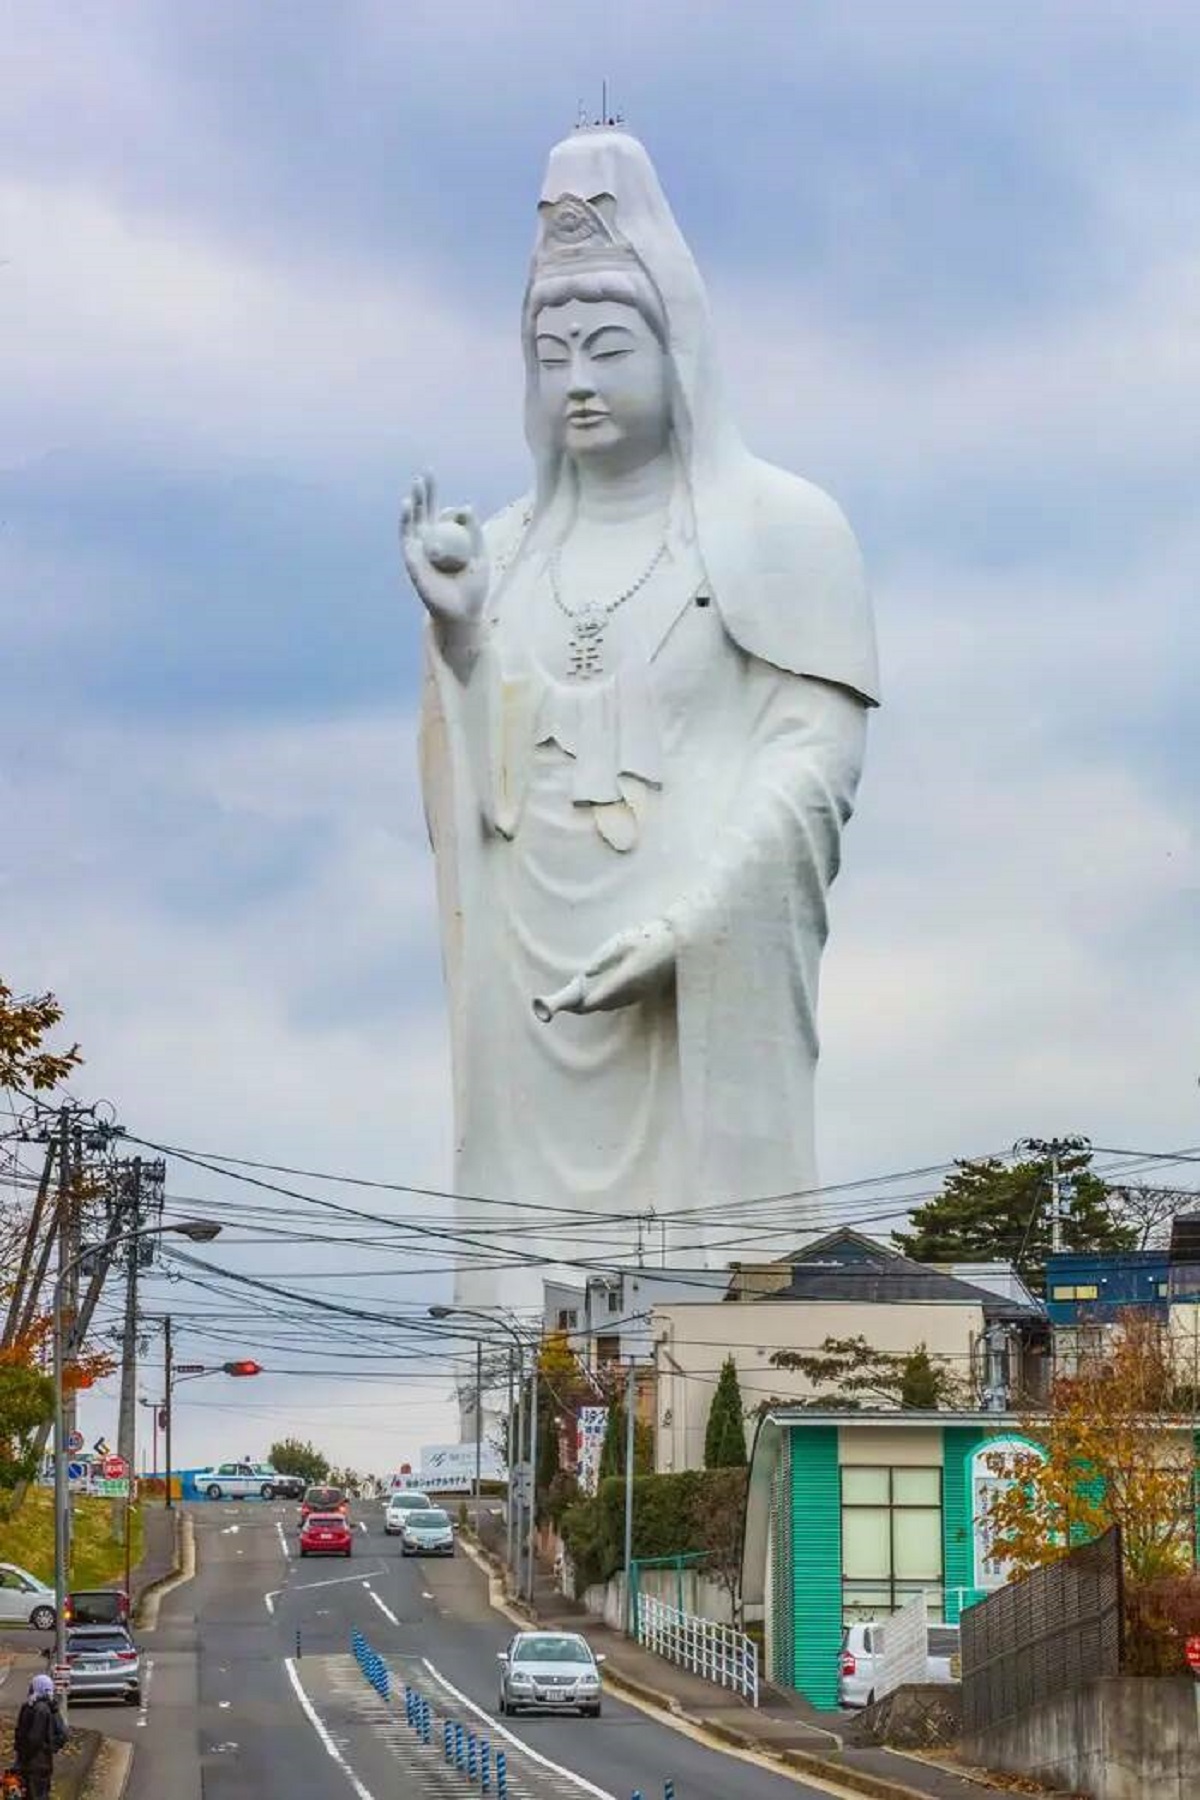 This isn't photoshop — it's the Sendai Daikannon, the fifth-tallest statue in the world: